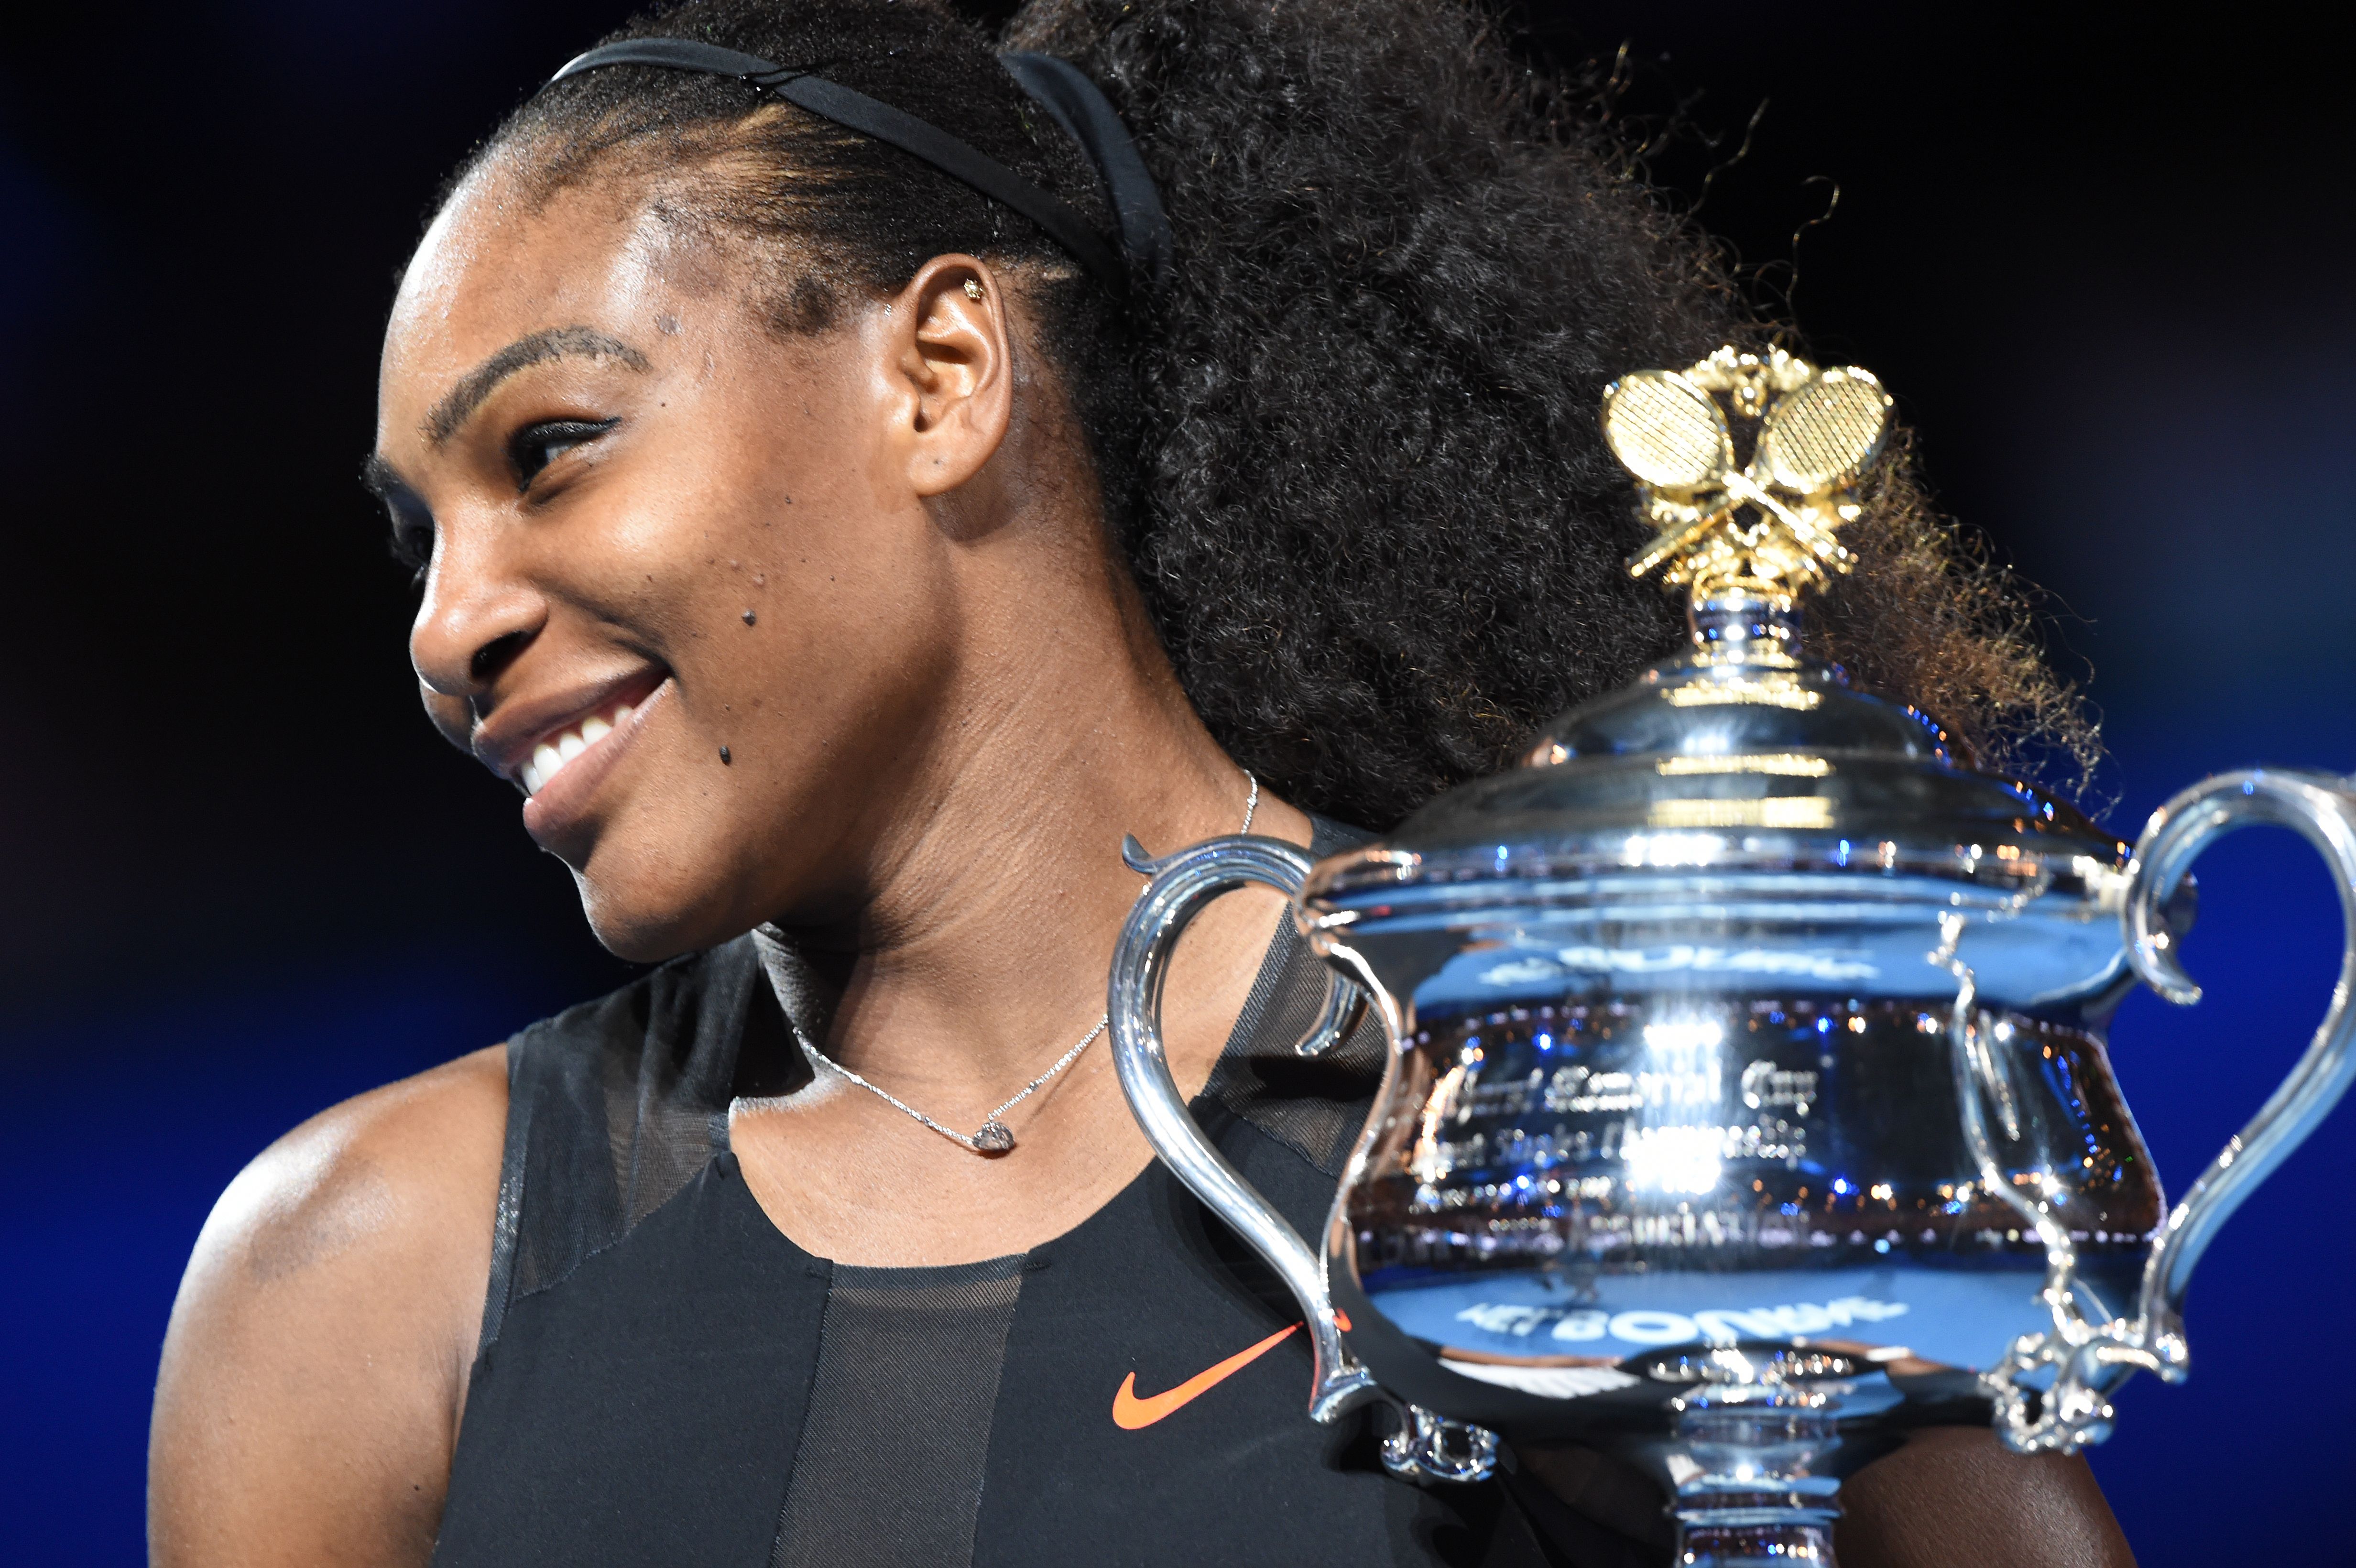 The best phrases of Serena Williams gettyimages 633139798